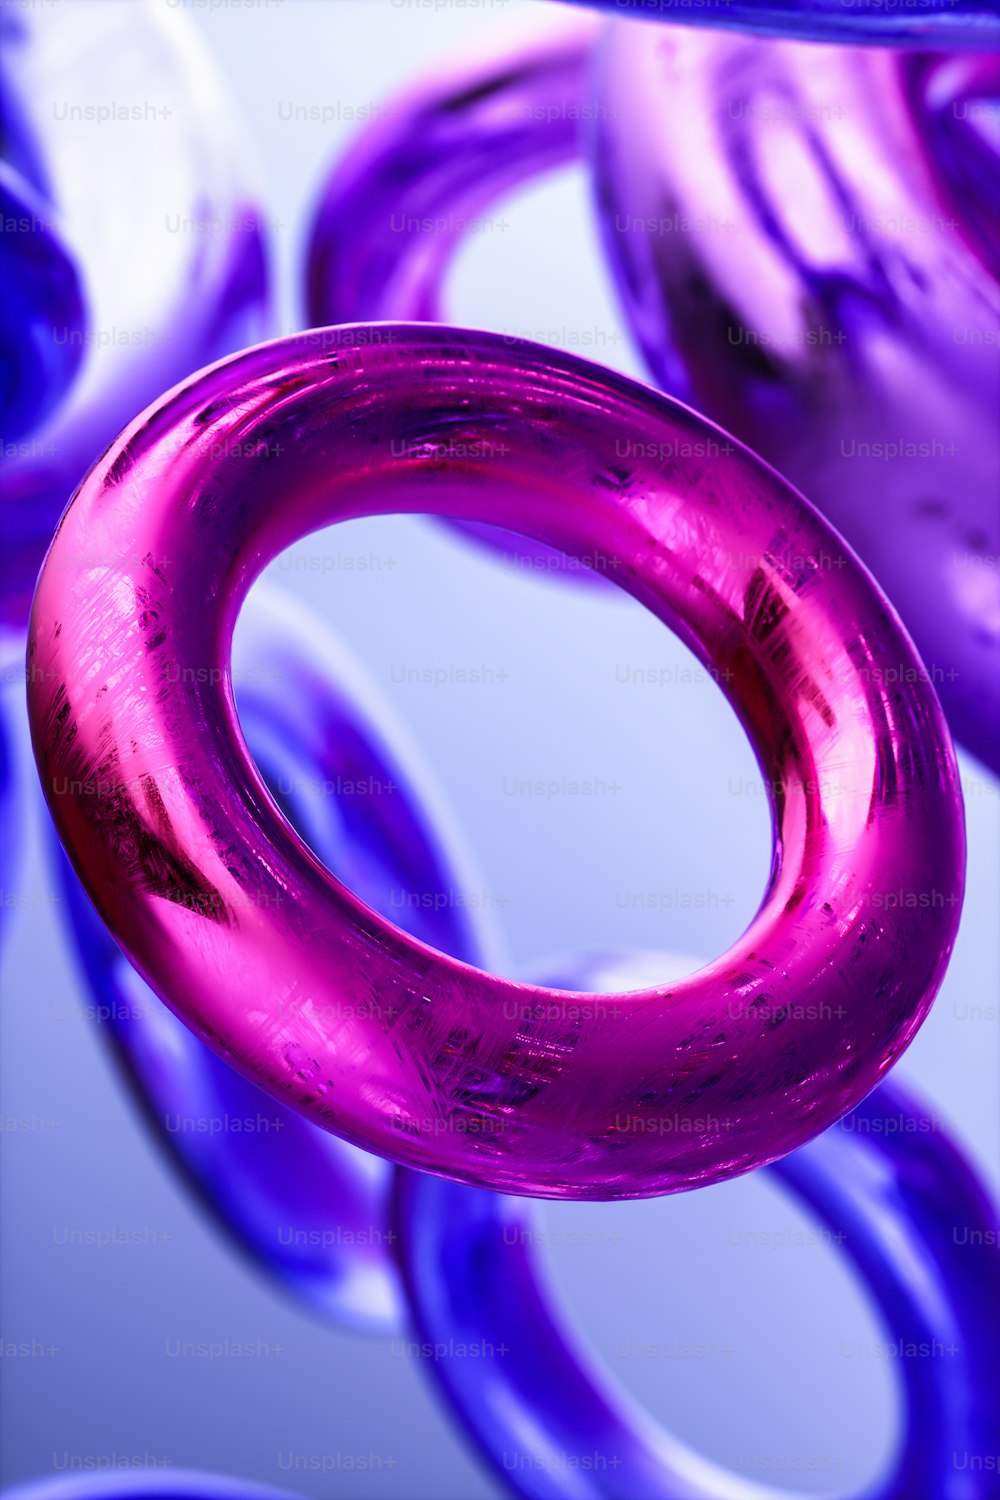 a close up of a purple ring on a blue background